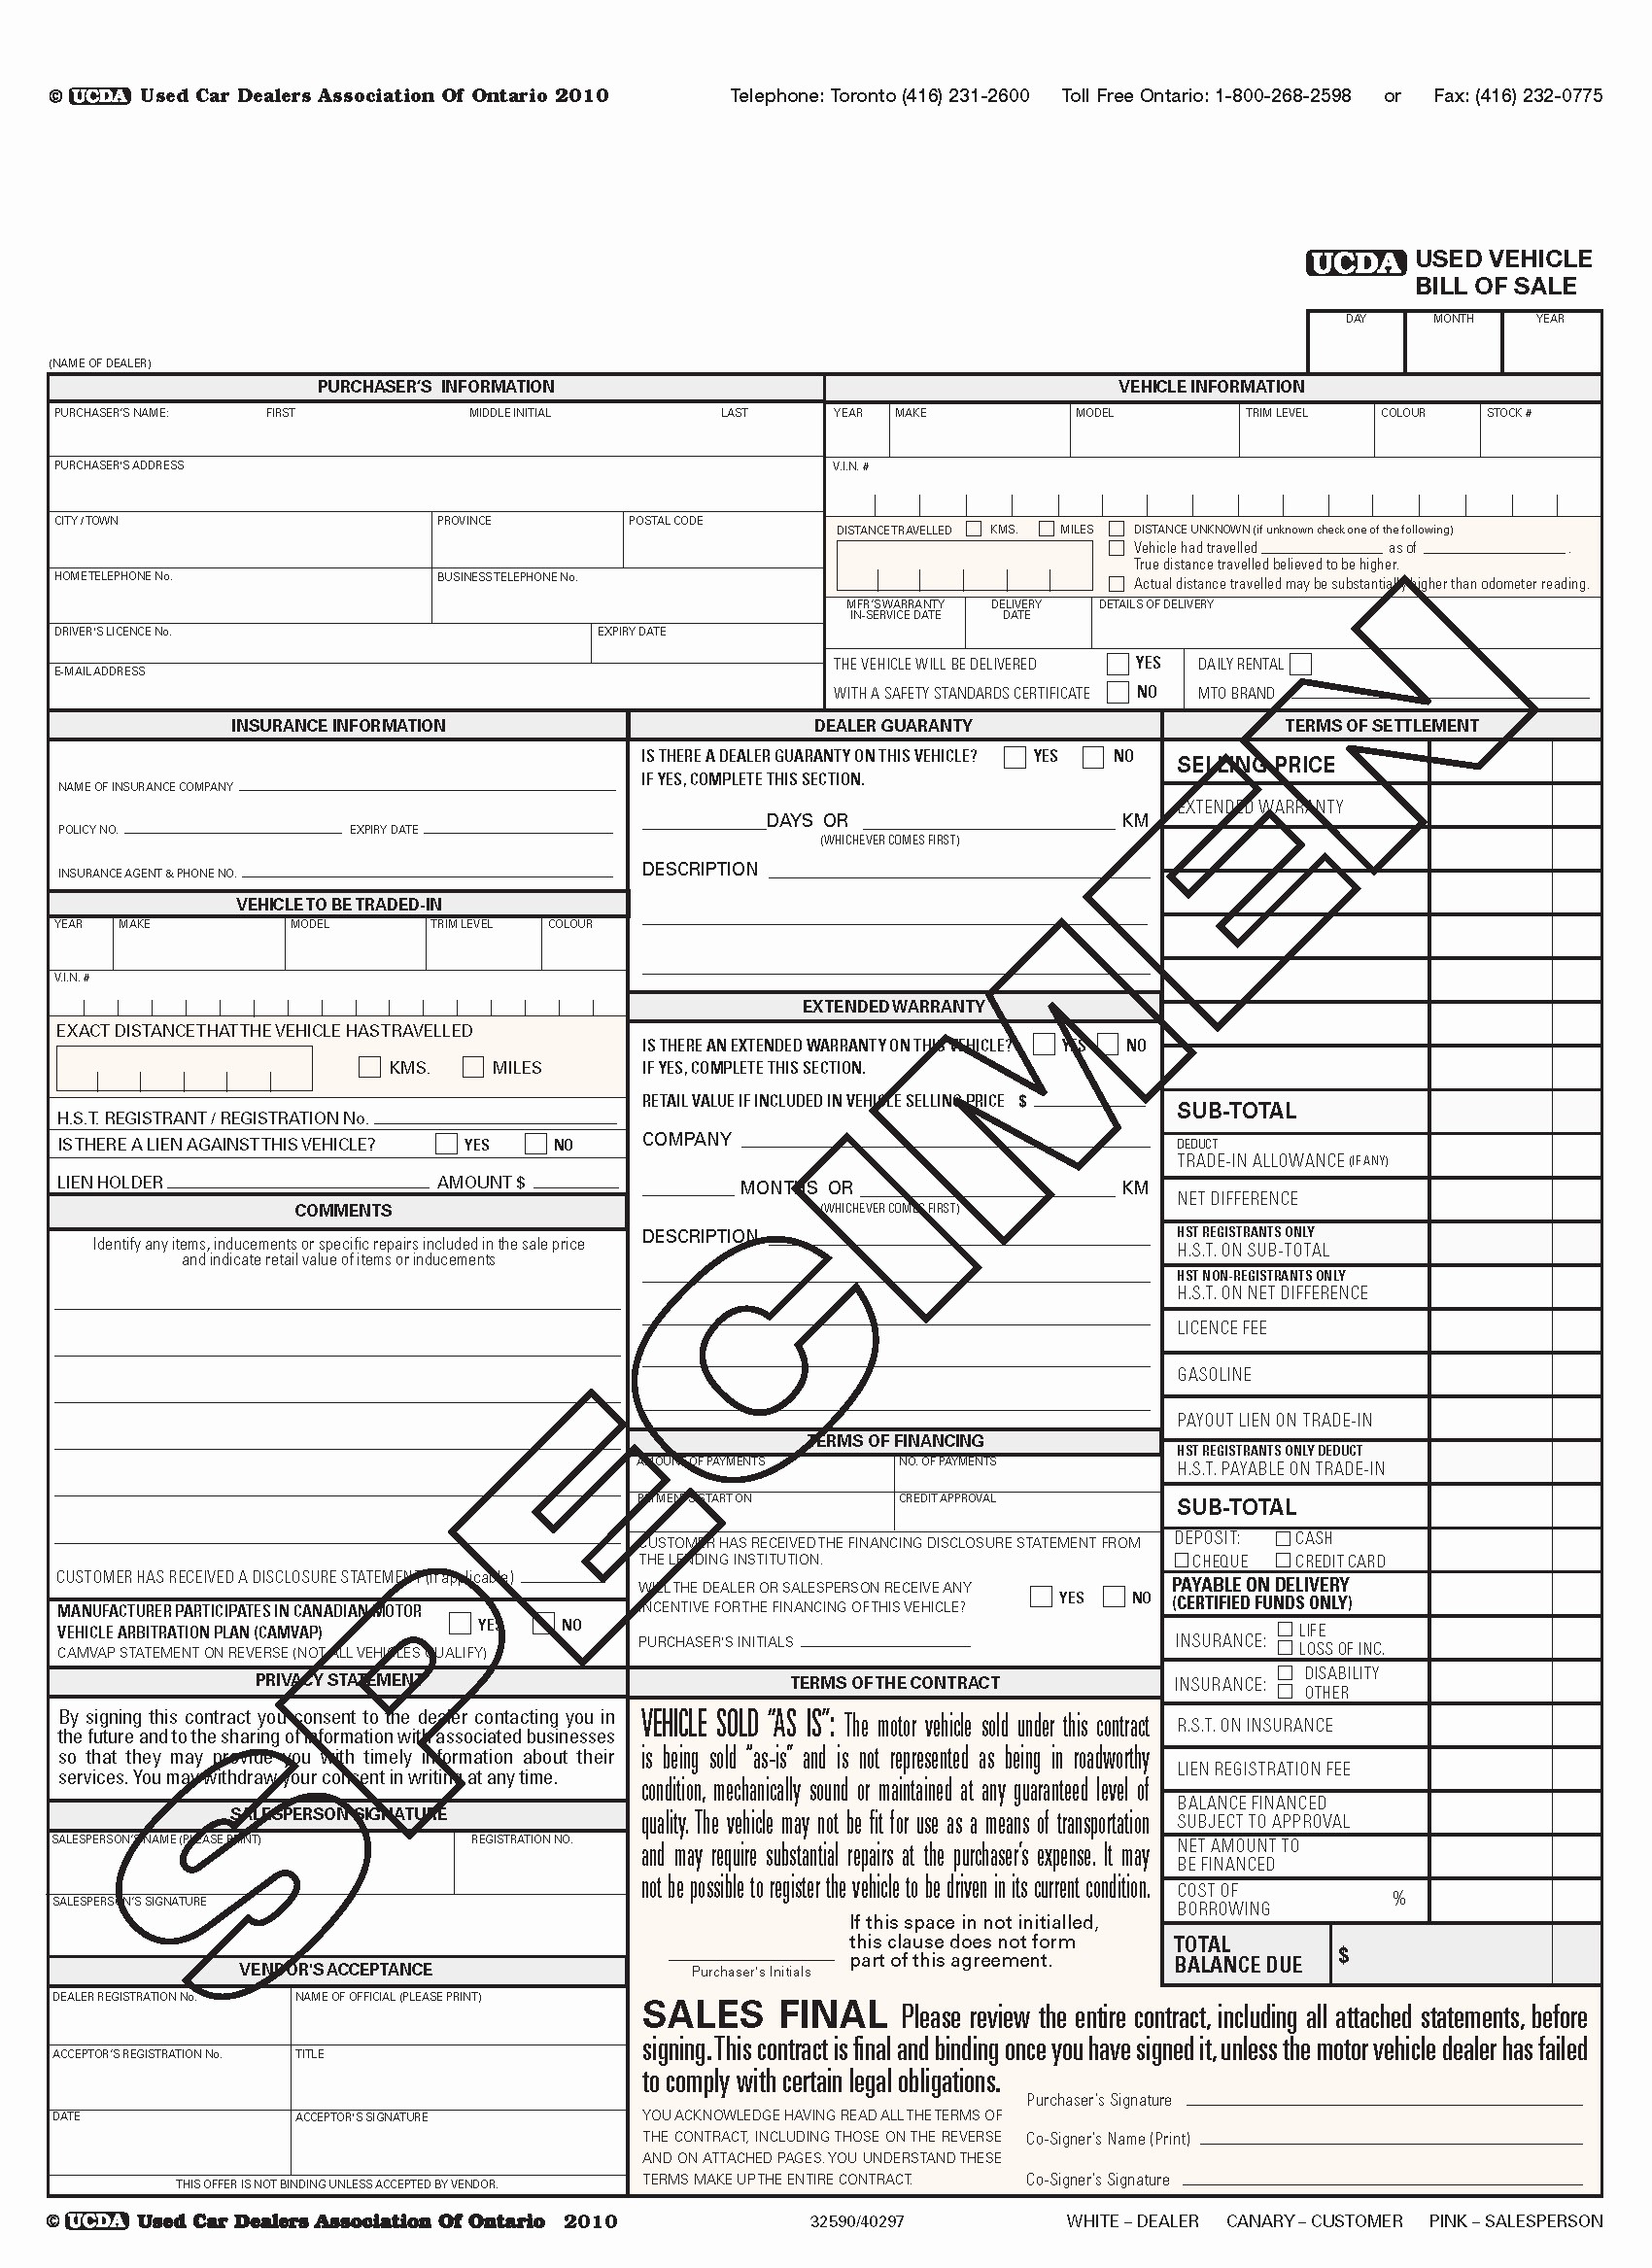 Bill Of Sale Used Vehicle Fresh View form order form